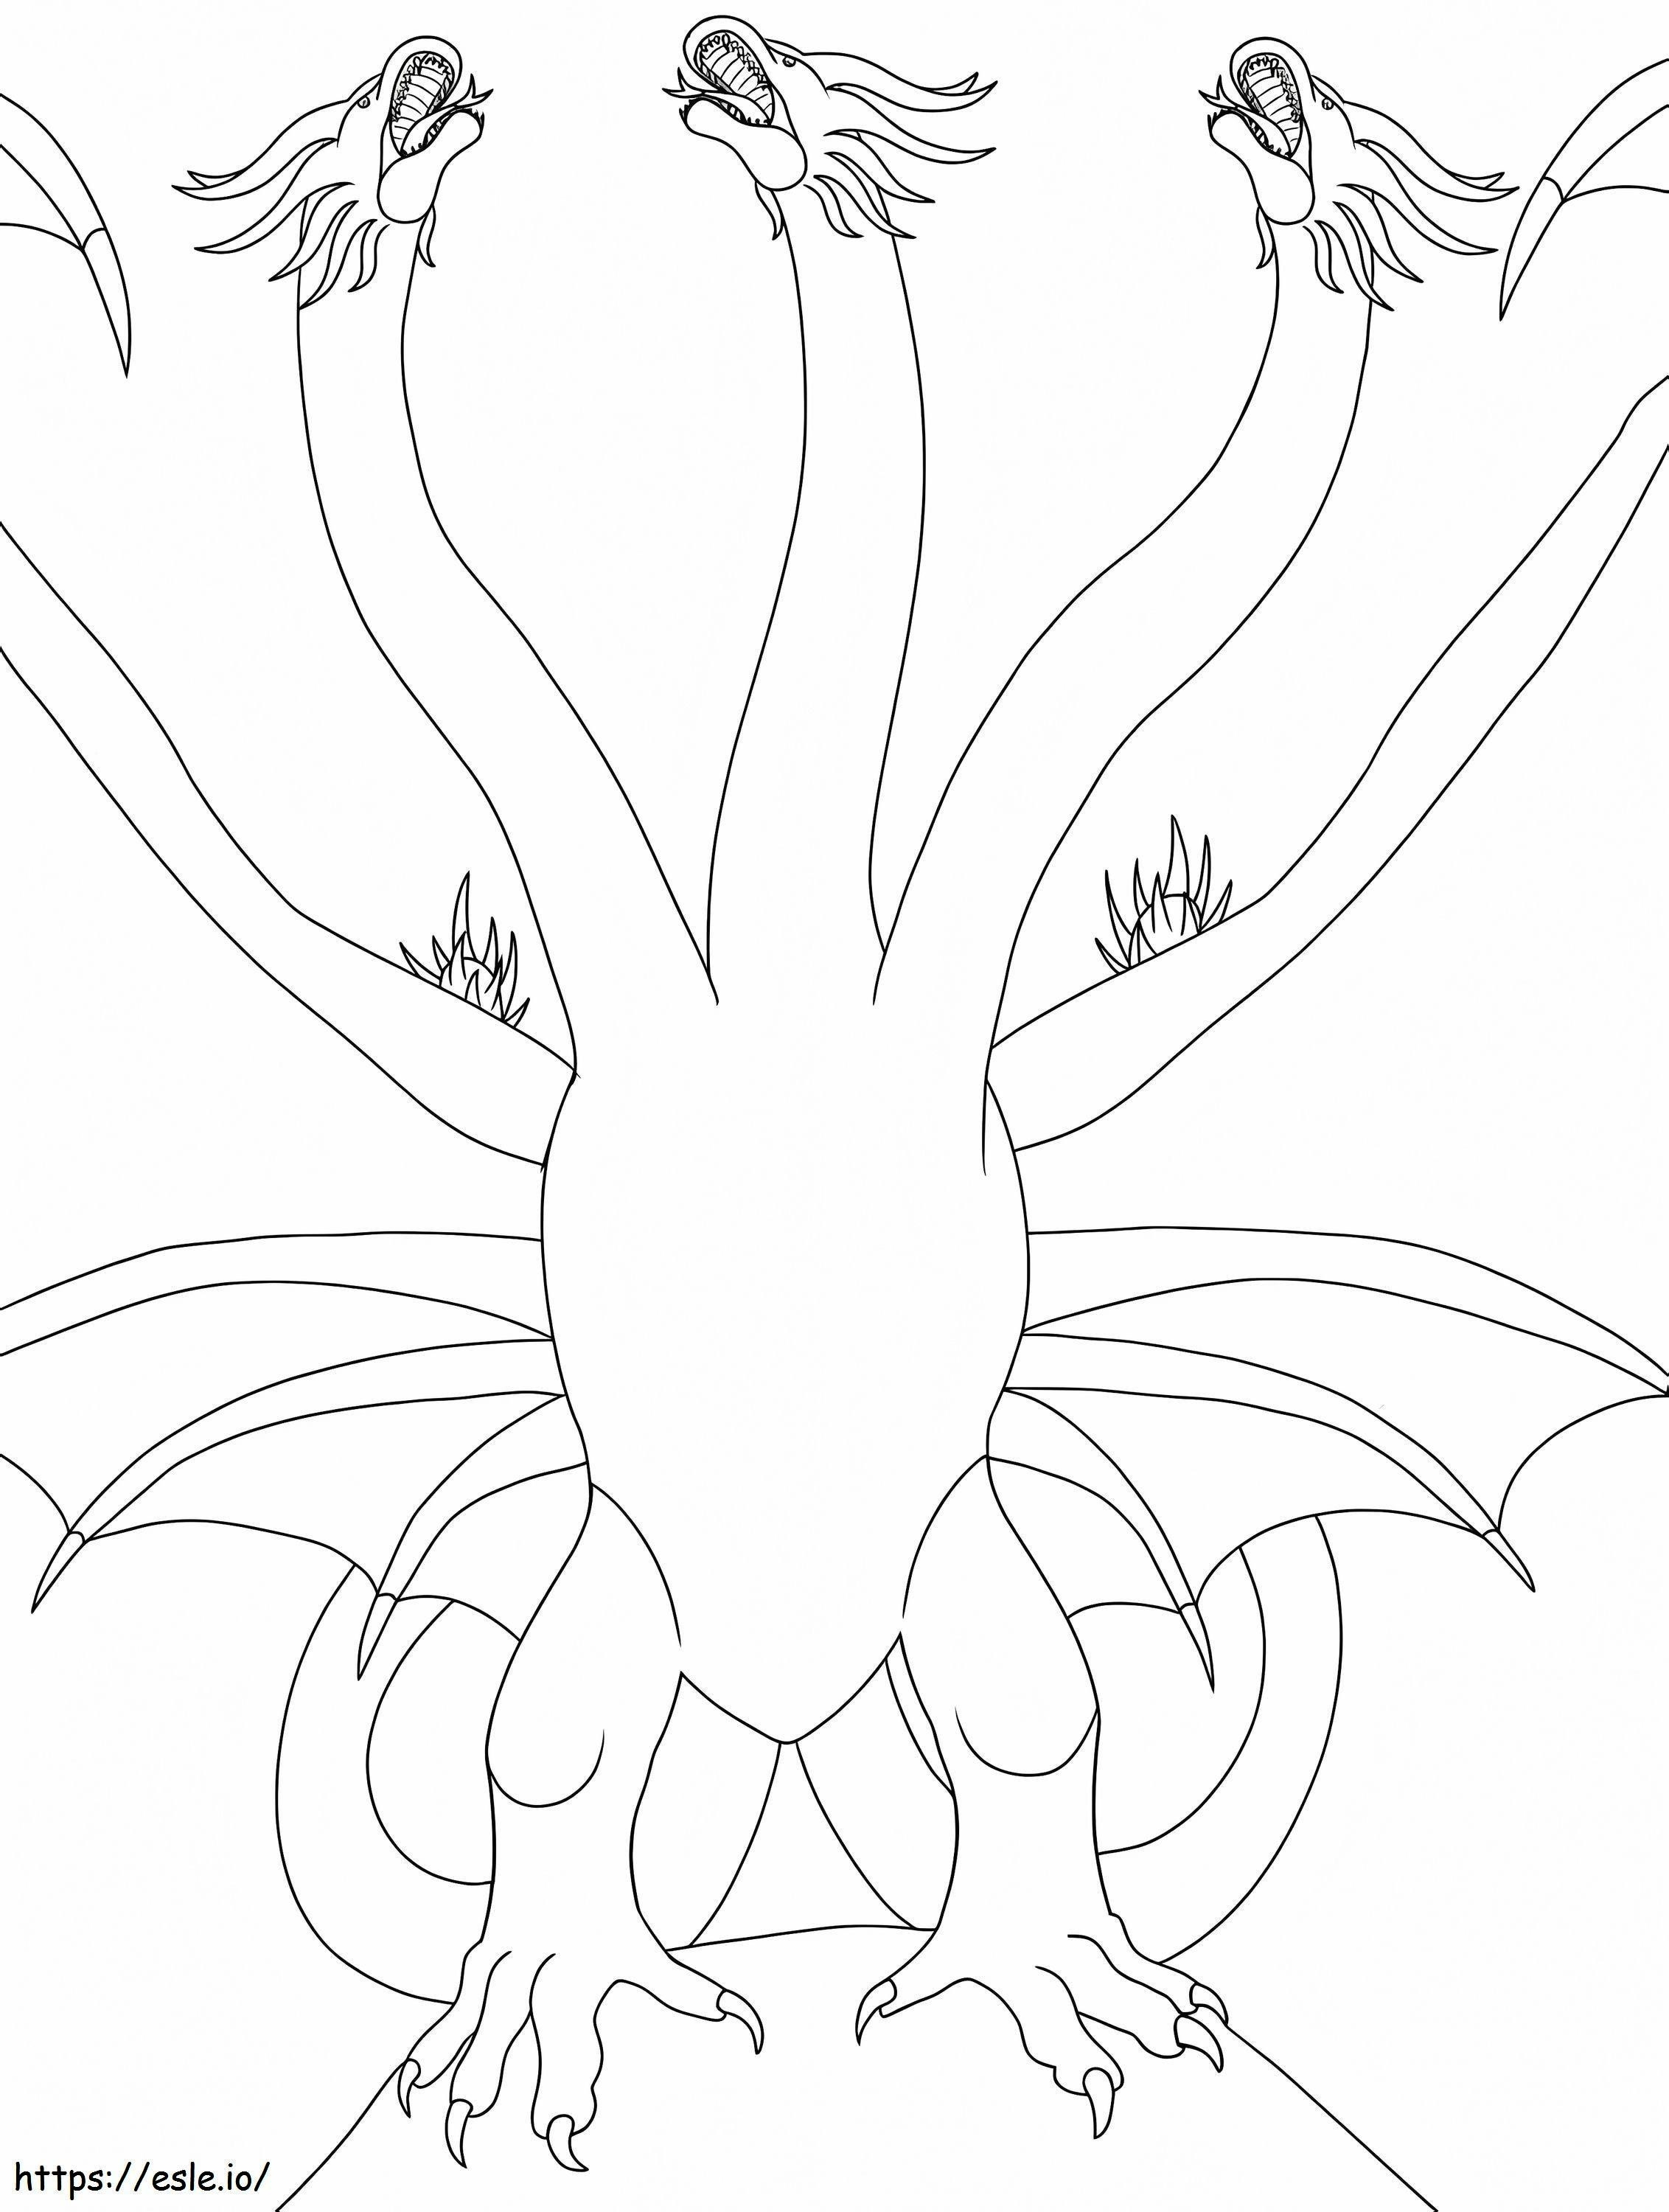 Angry Ghidorah coloring page